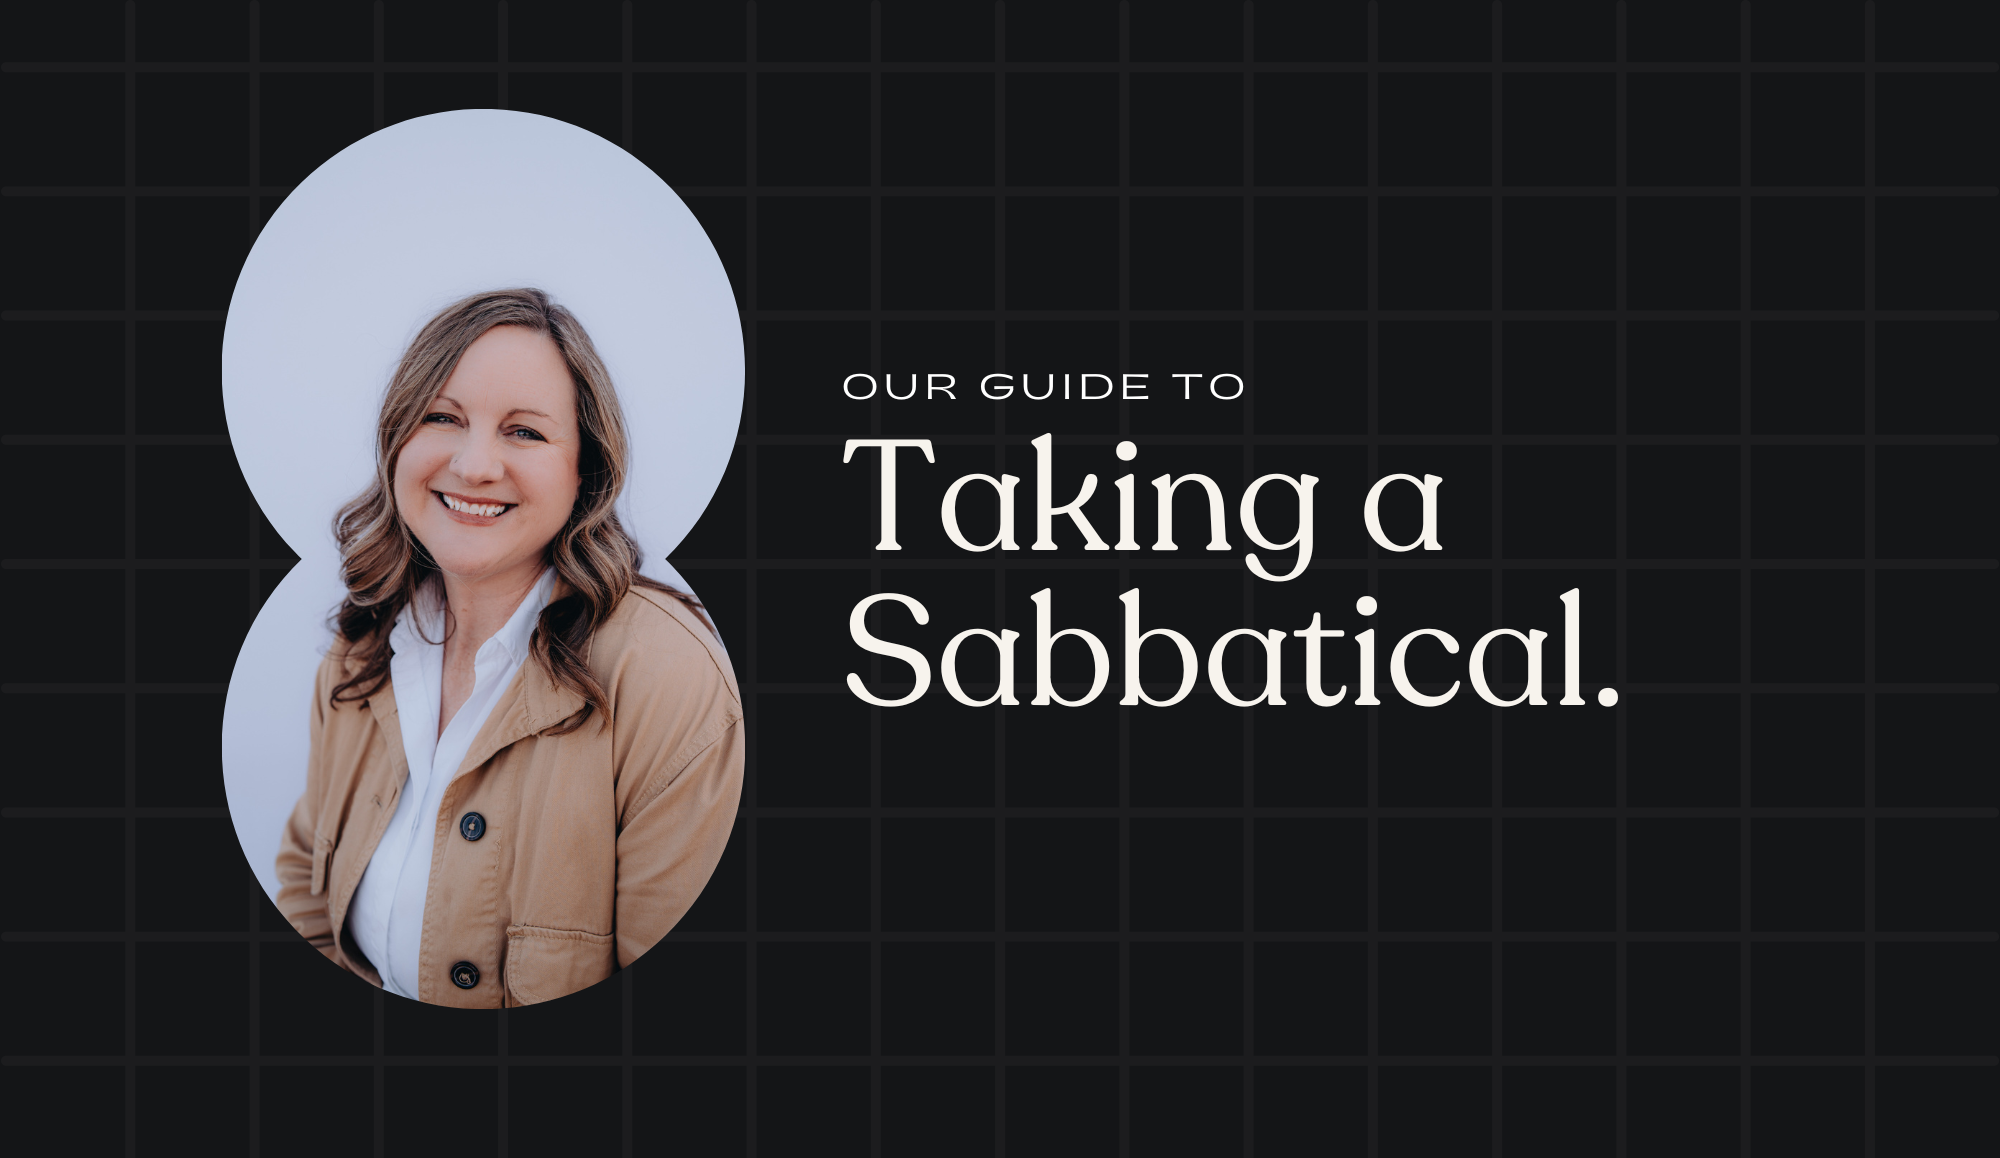 Our Guide to Taking a Sabbatical